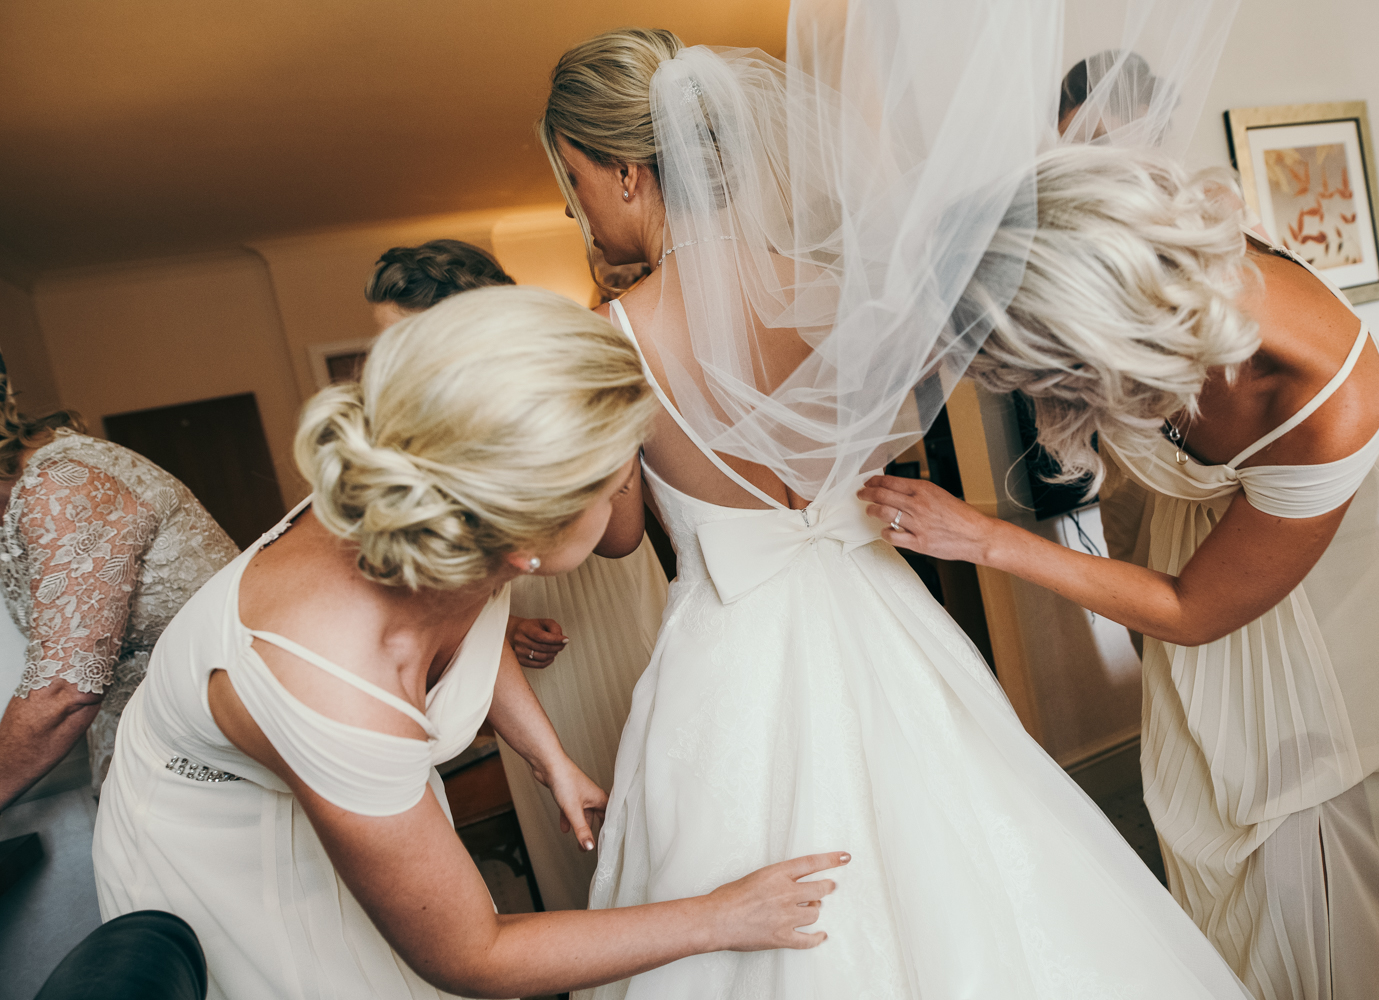 A bride being helped into her wedding dress during morning bridal preparations